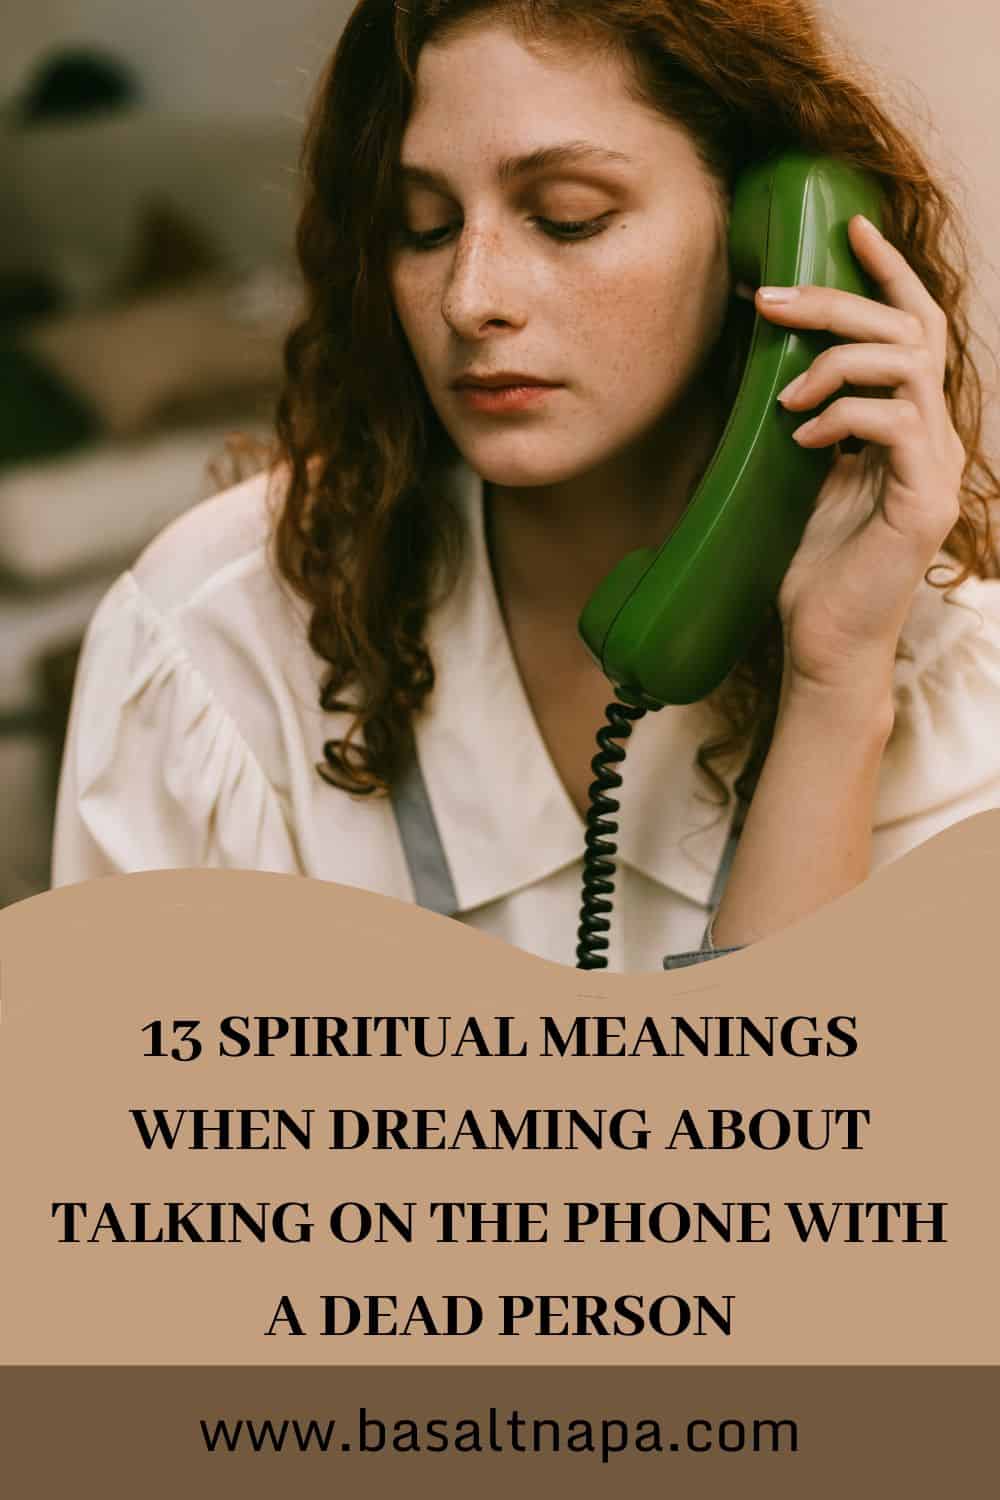 Dream About Talking On The Phone With a Dead Person